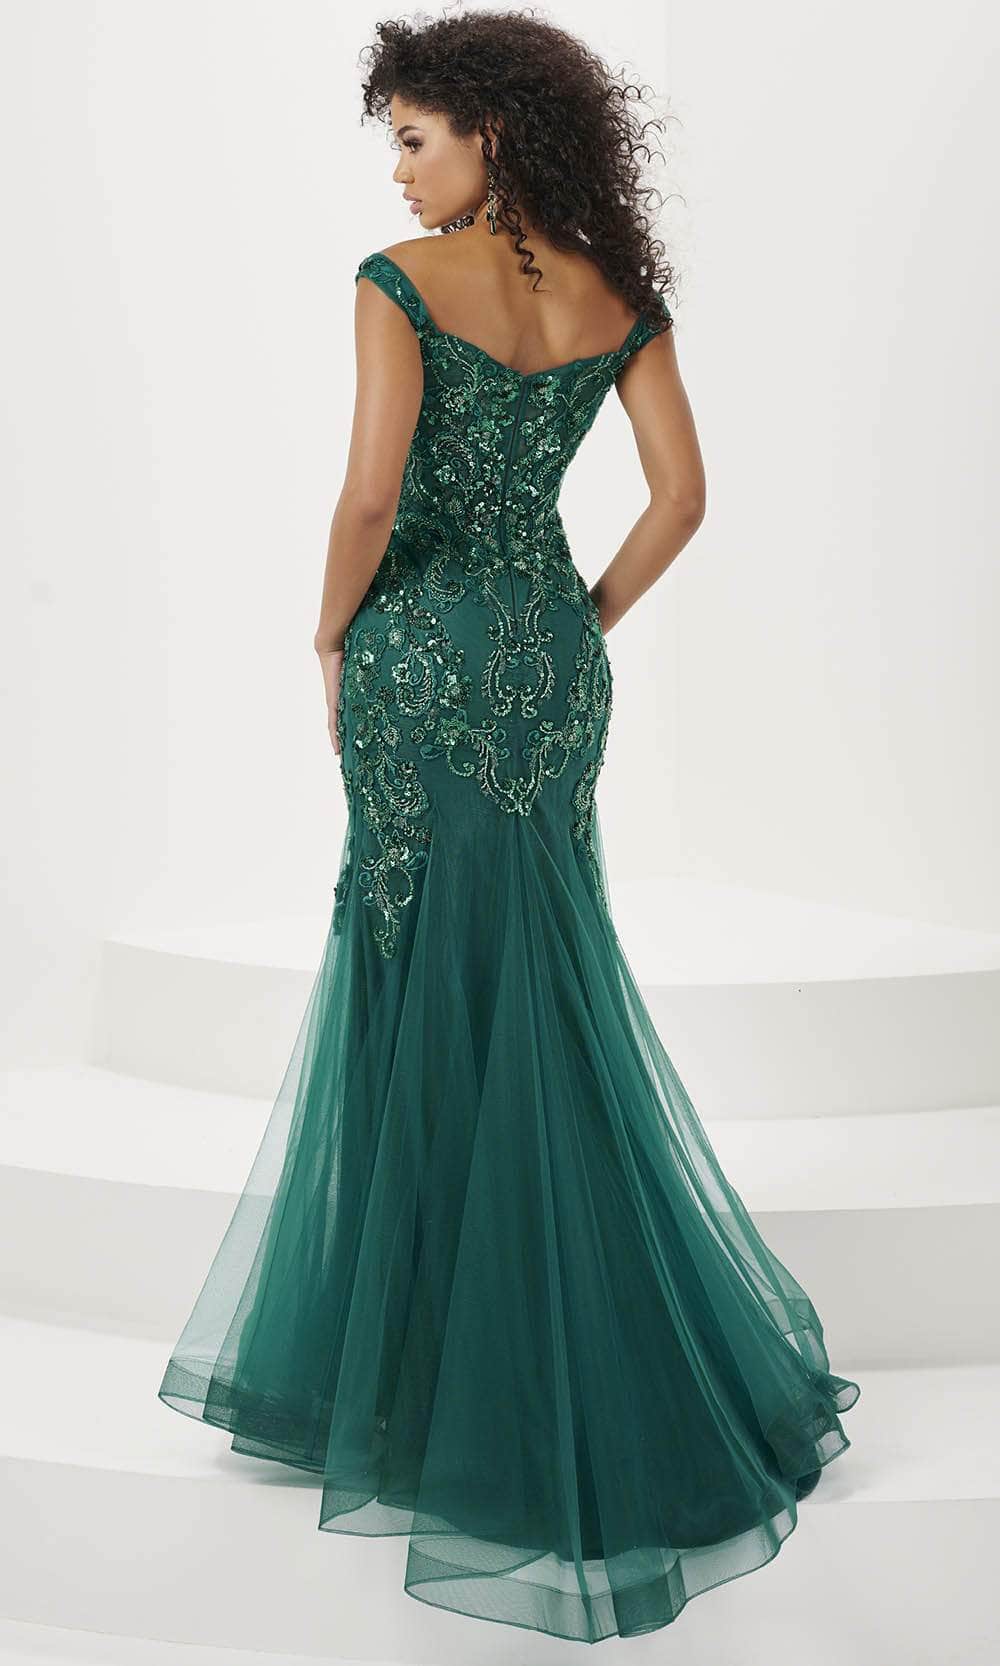 Panoply 14185 - Sequin Tulle Evening Gown Evening Gown